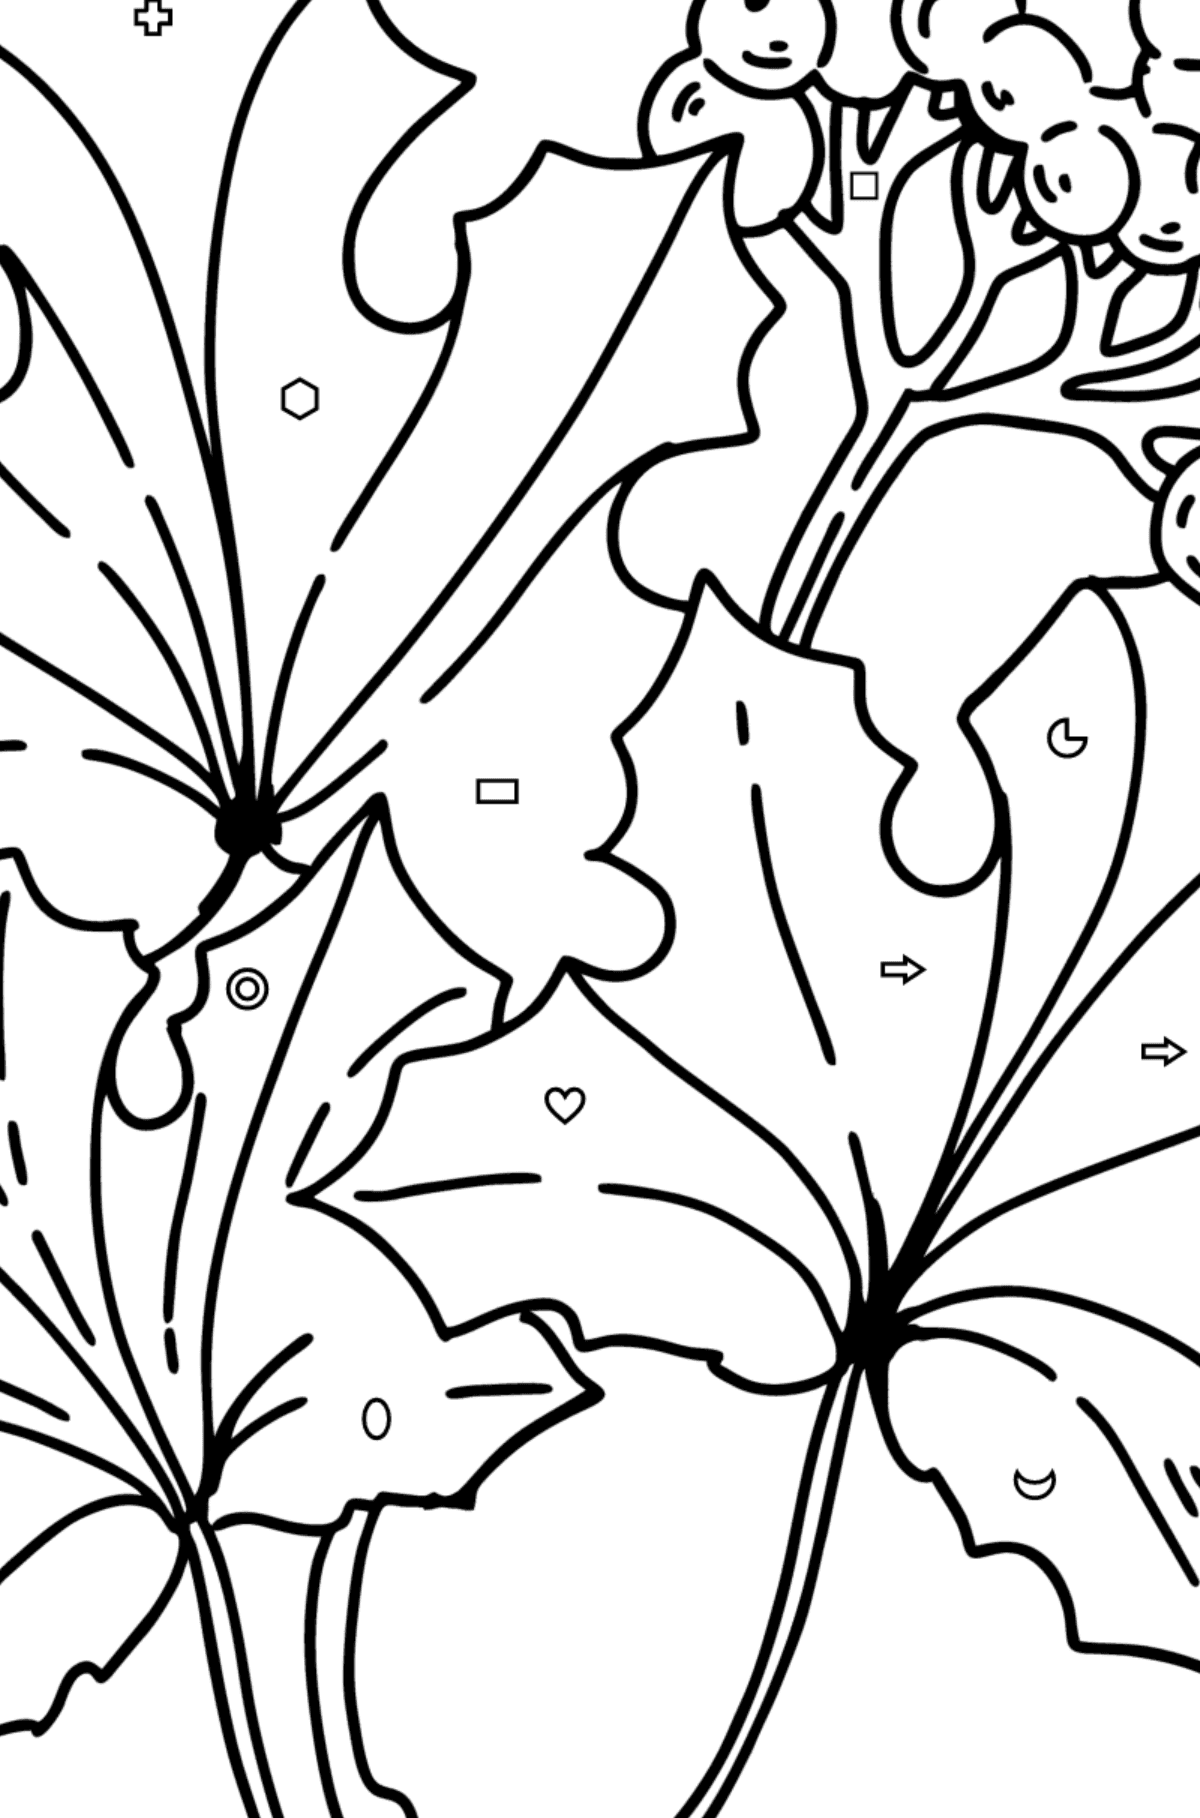 Coloring page - Maple Leaves and Elderberries - Coloring by Geometric Shapes for Kids